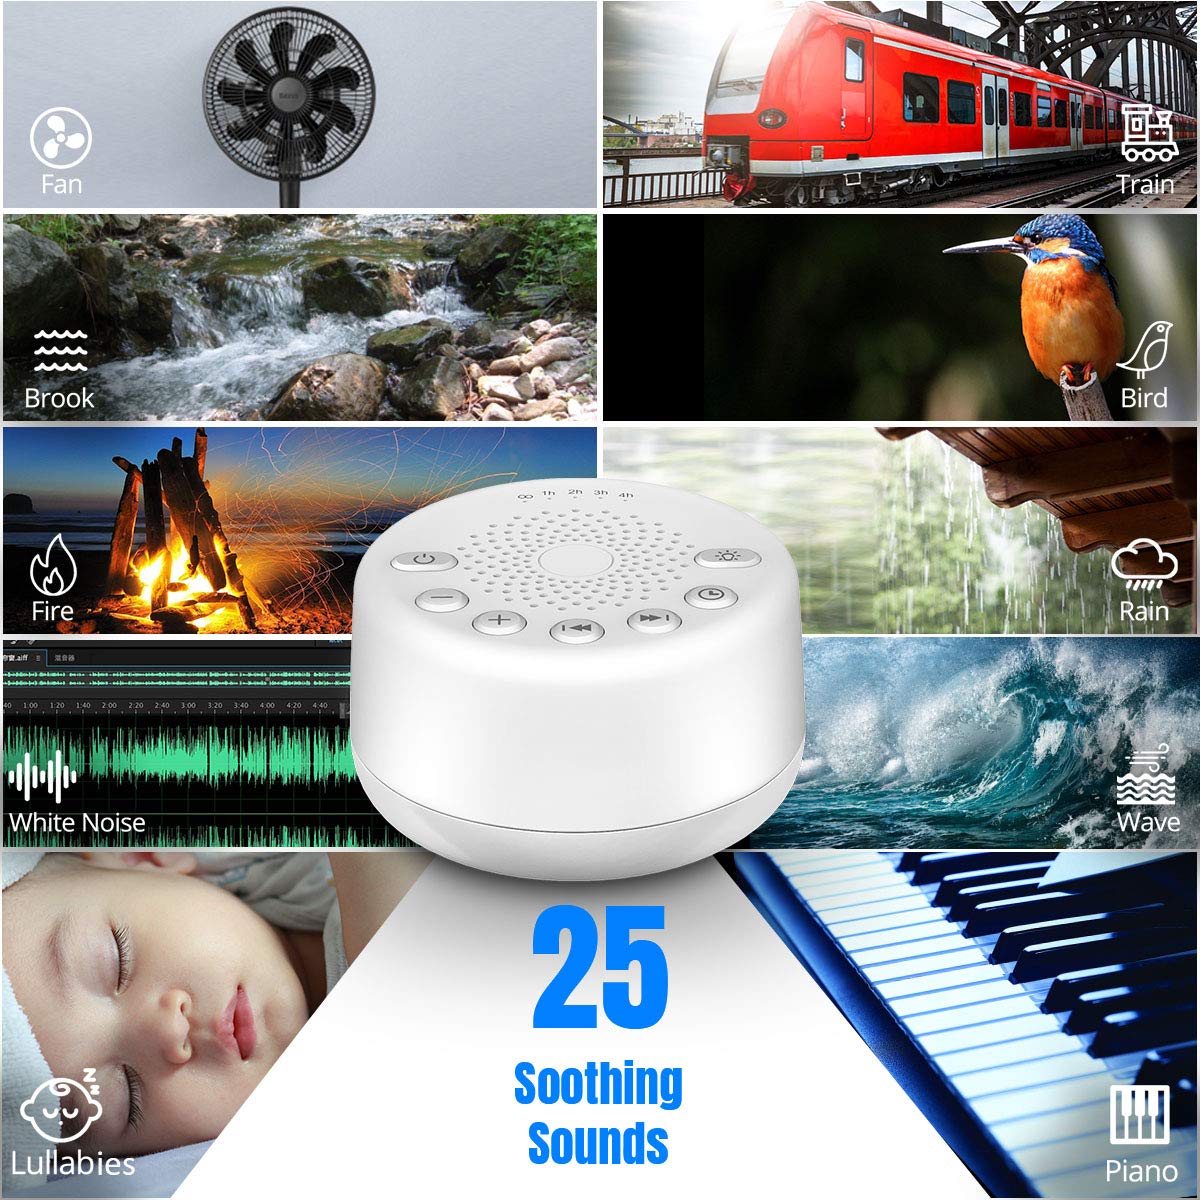 Sound Machine Easysleep White Noise Machine with 25 Soothing Sounds and Night Lights with Memory Function 32 Levels of Volume and 5 Sleep Timer Powered by AC or USB for Sleeping Relaxation (White)